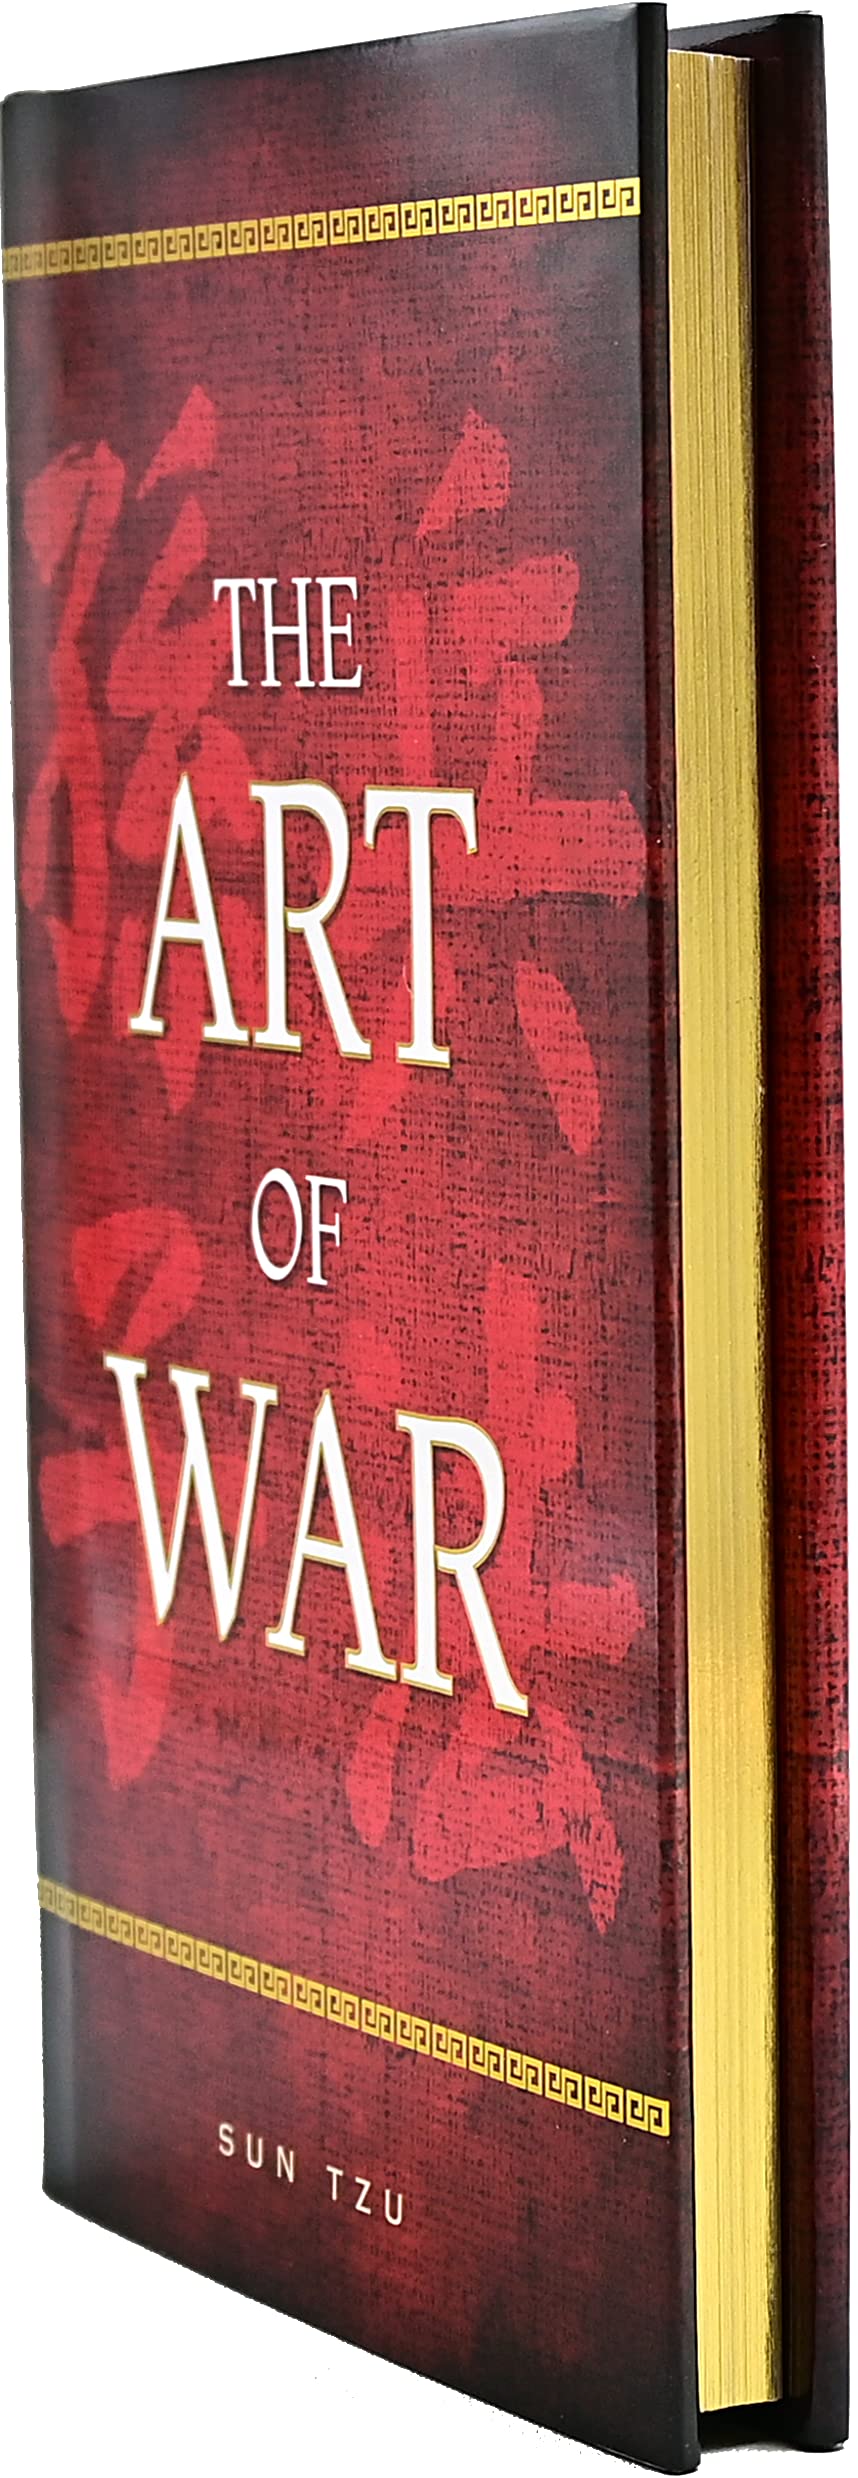 The Art Of War (Deluxe, Hardcover edition)